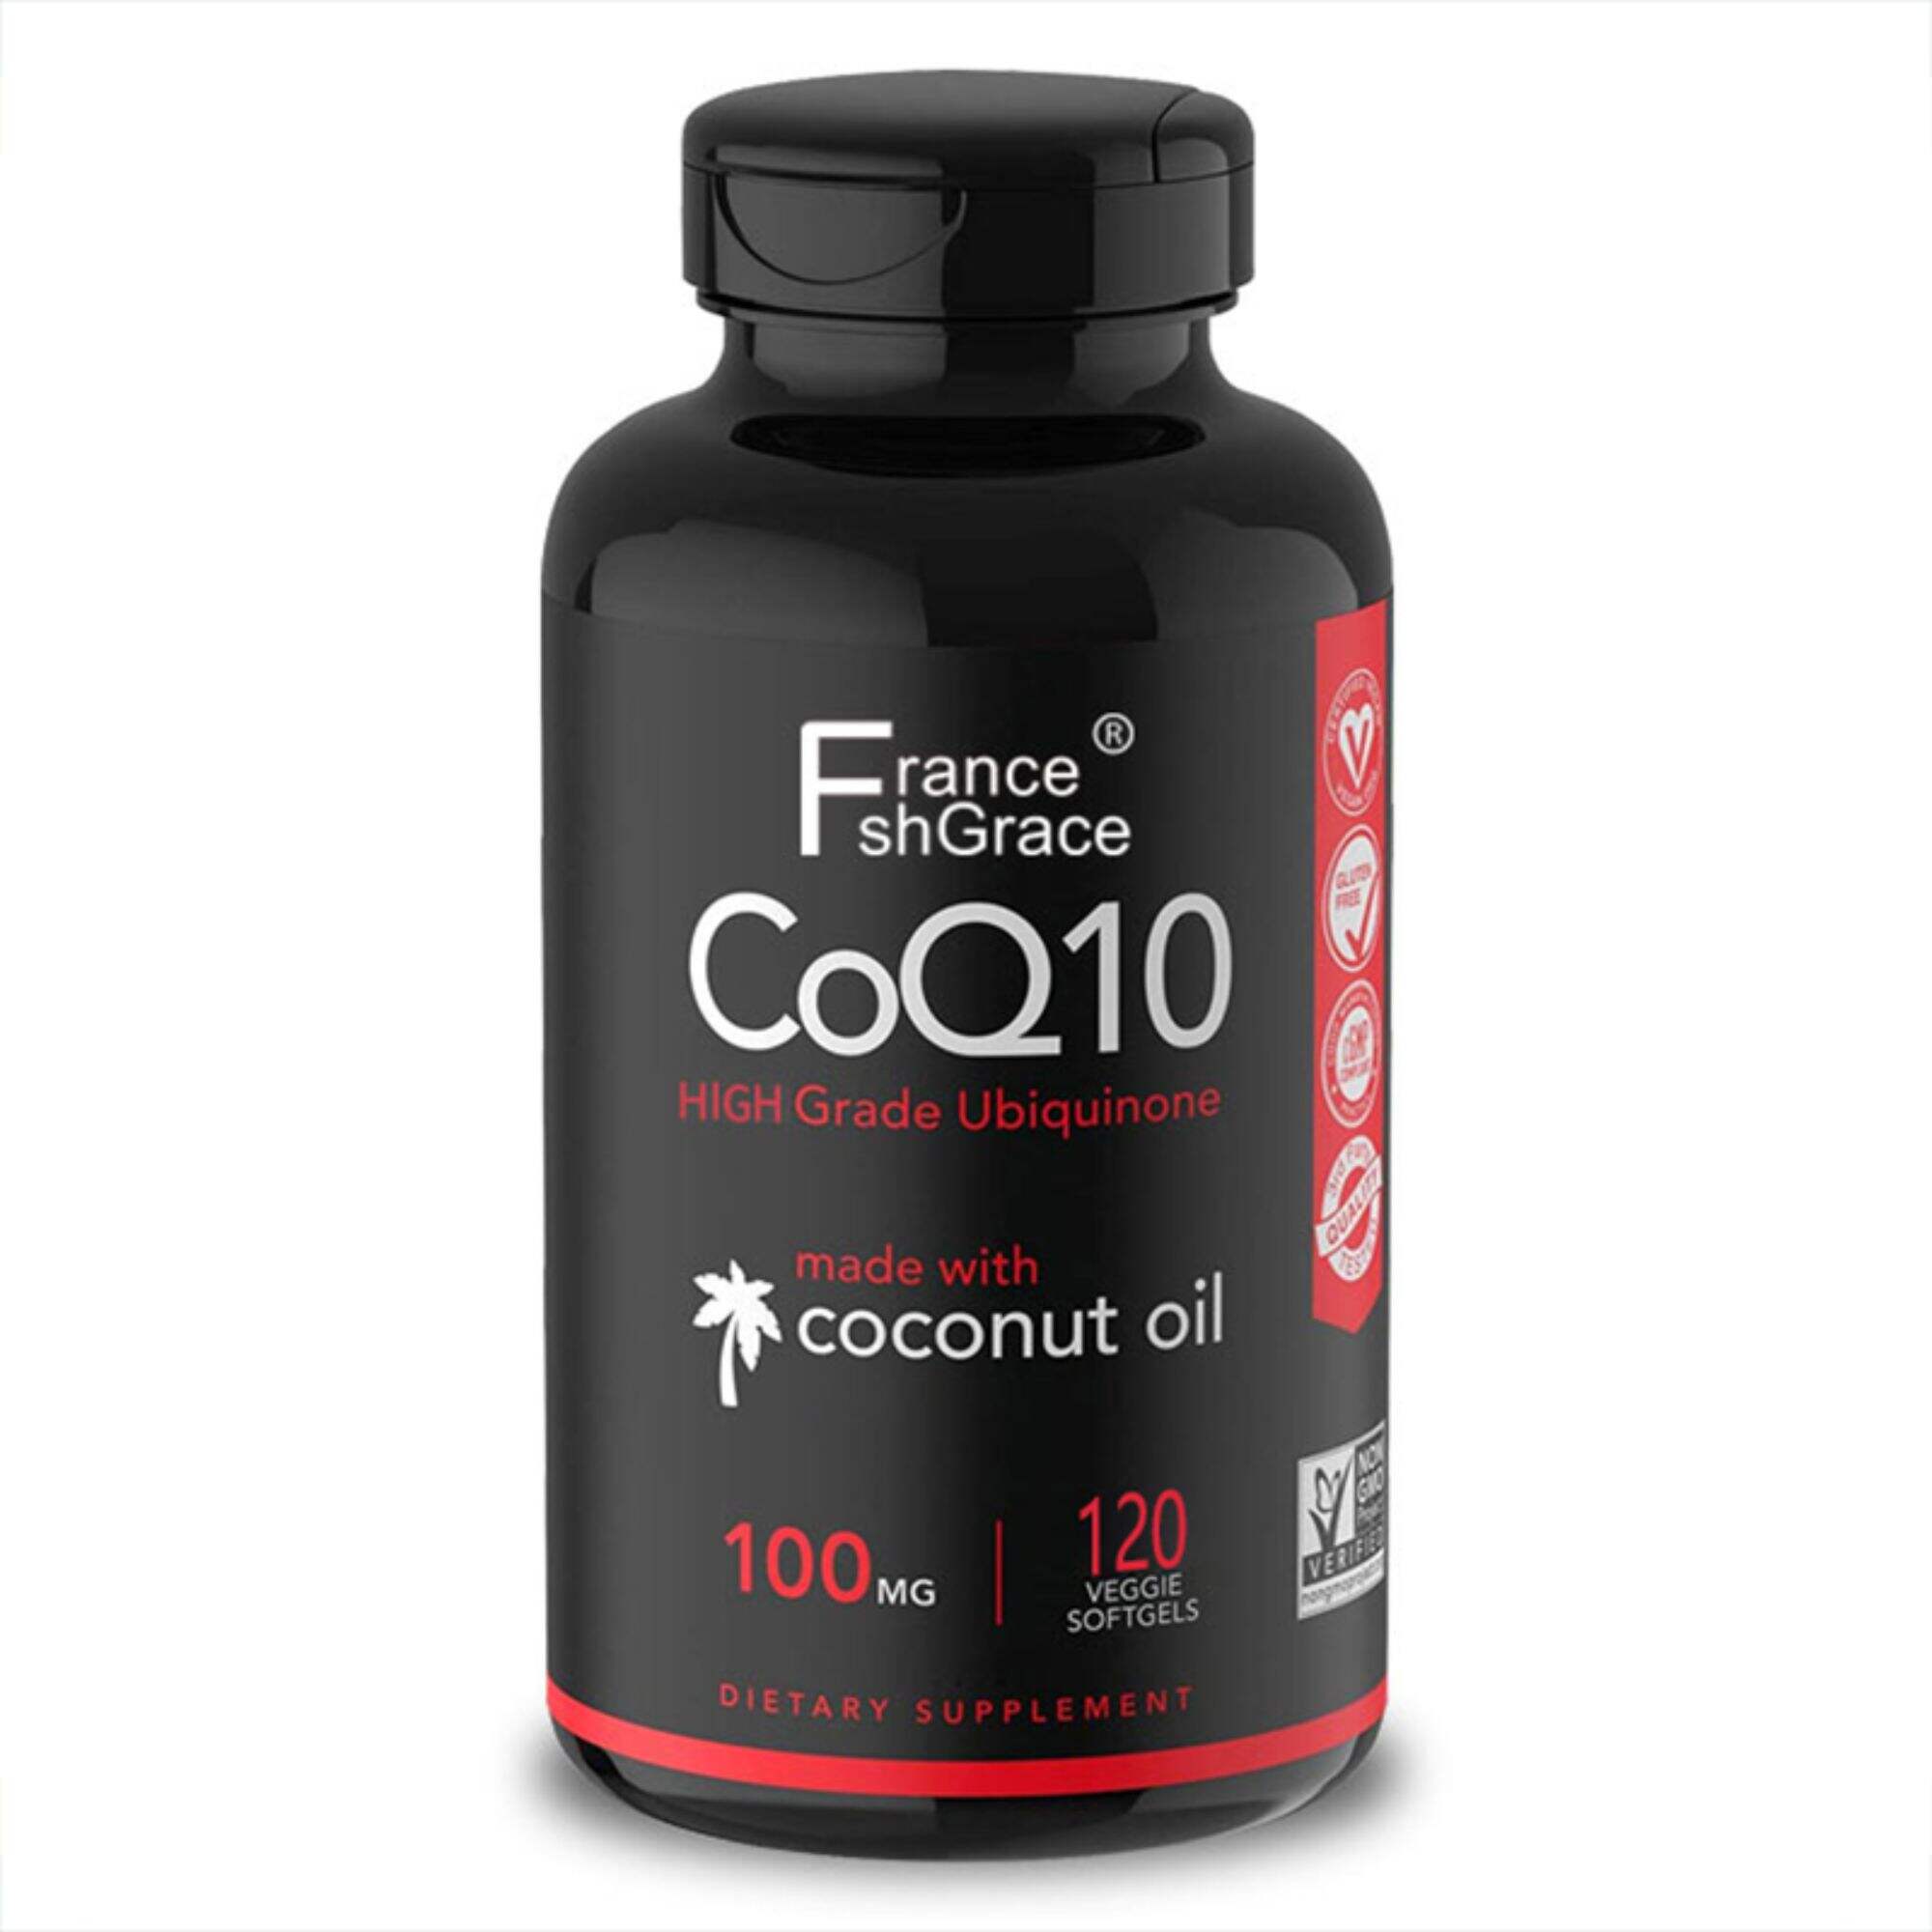 CoQ10 100mg Enhanced with Coconut Oil & Bioperine (Black Pepper) for Better Absorption | Vegan Certified and Non-GMO Verified